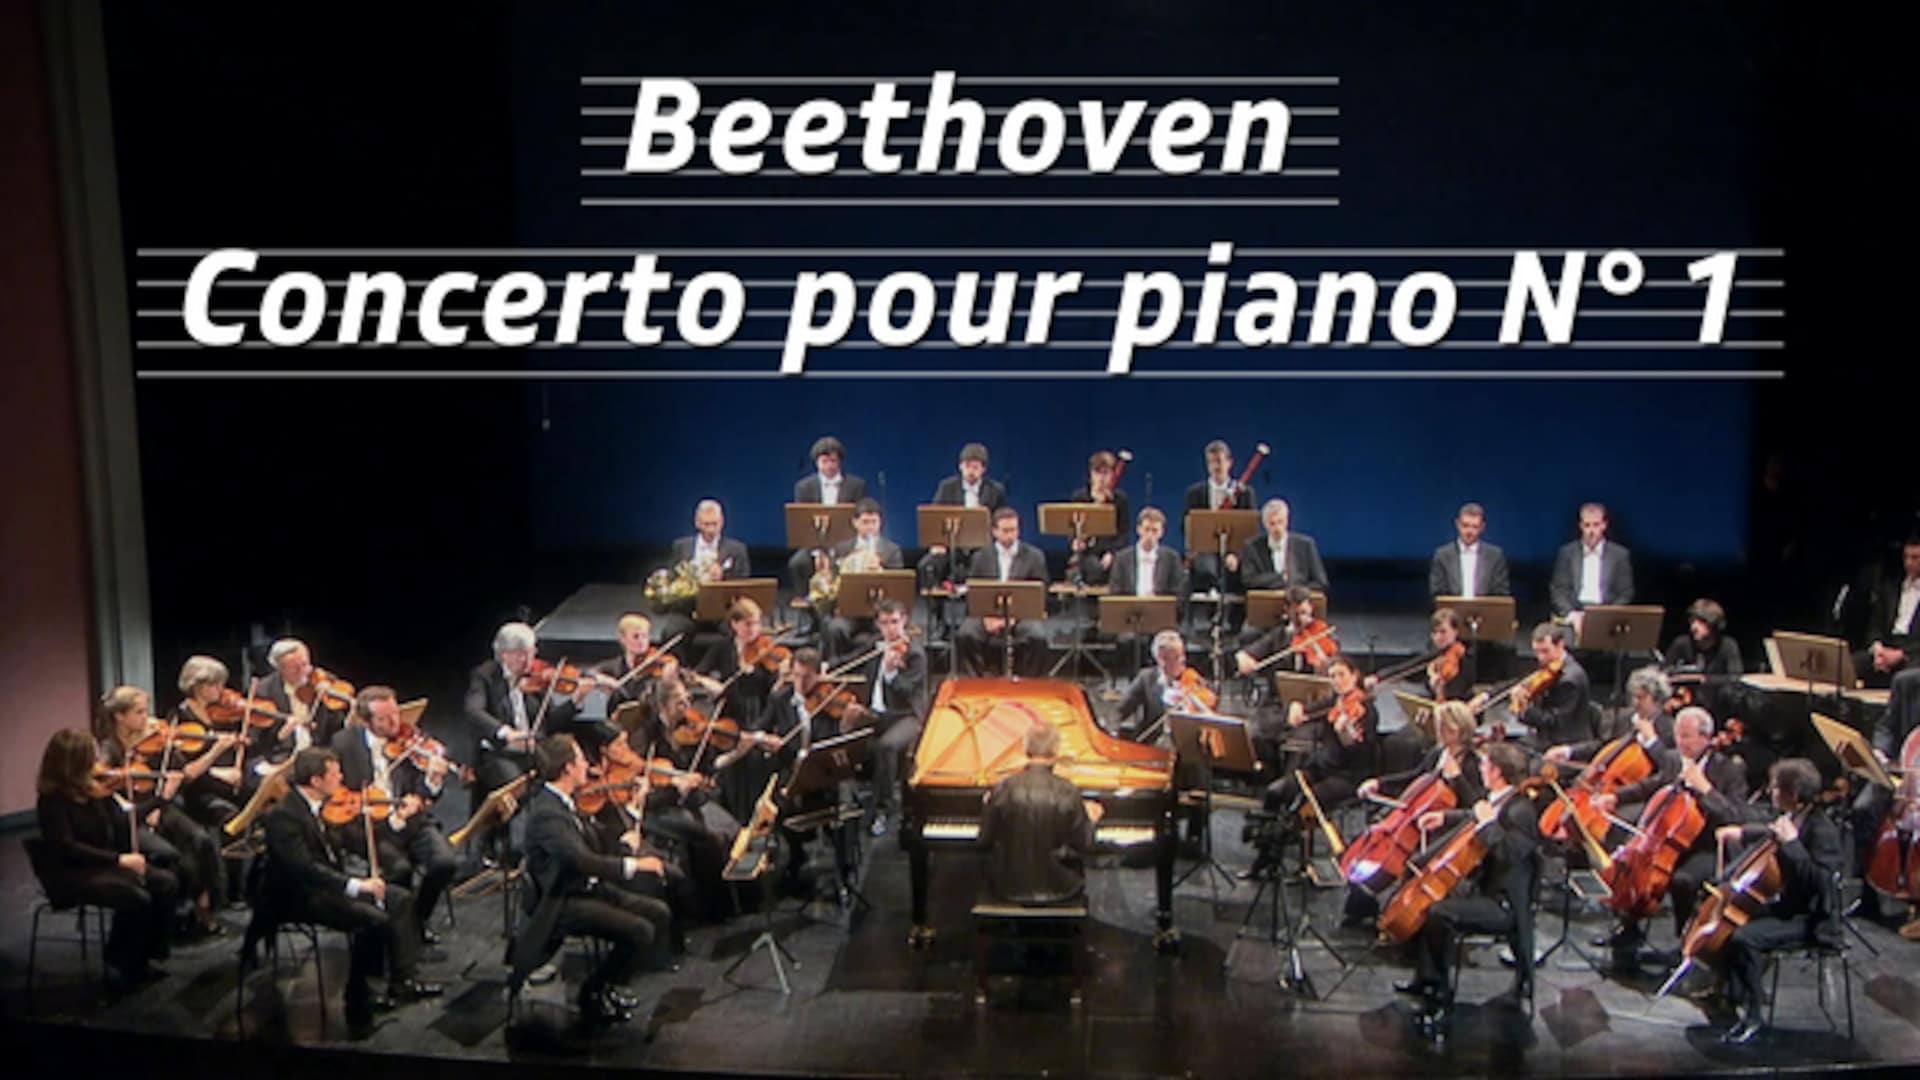 Beethoven - Concerto pour piano N° 1